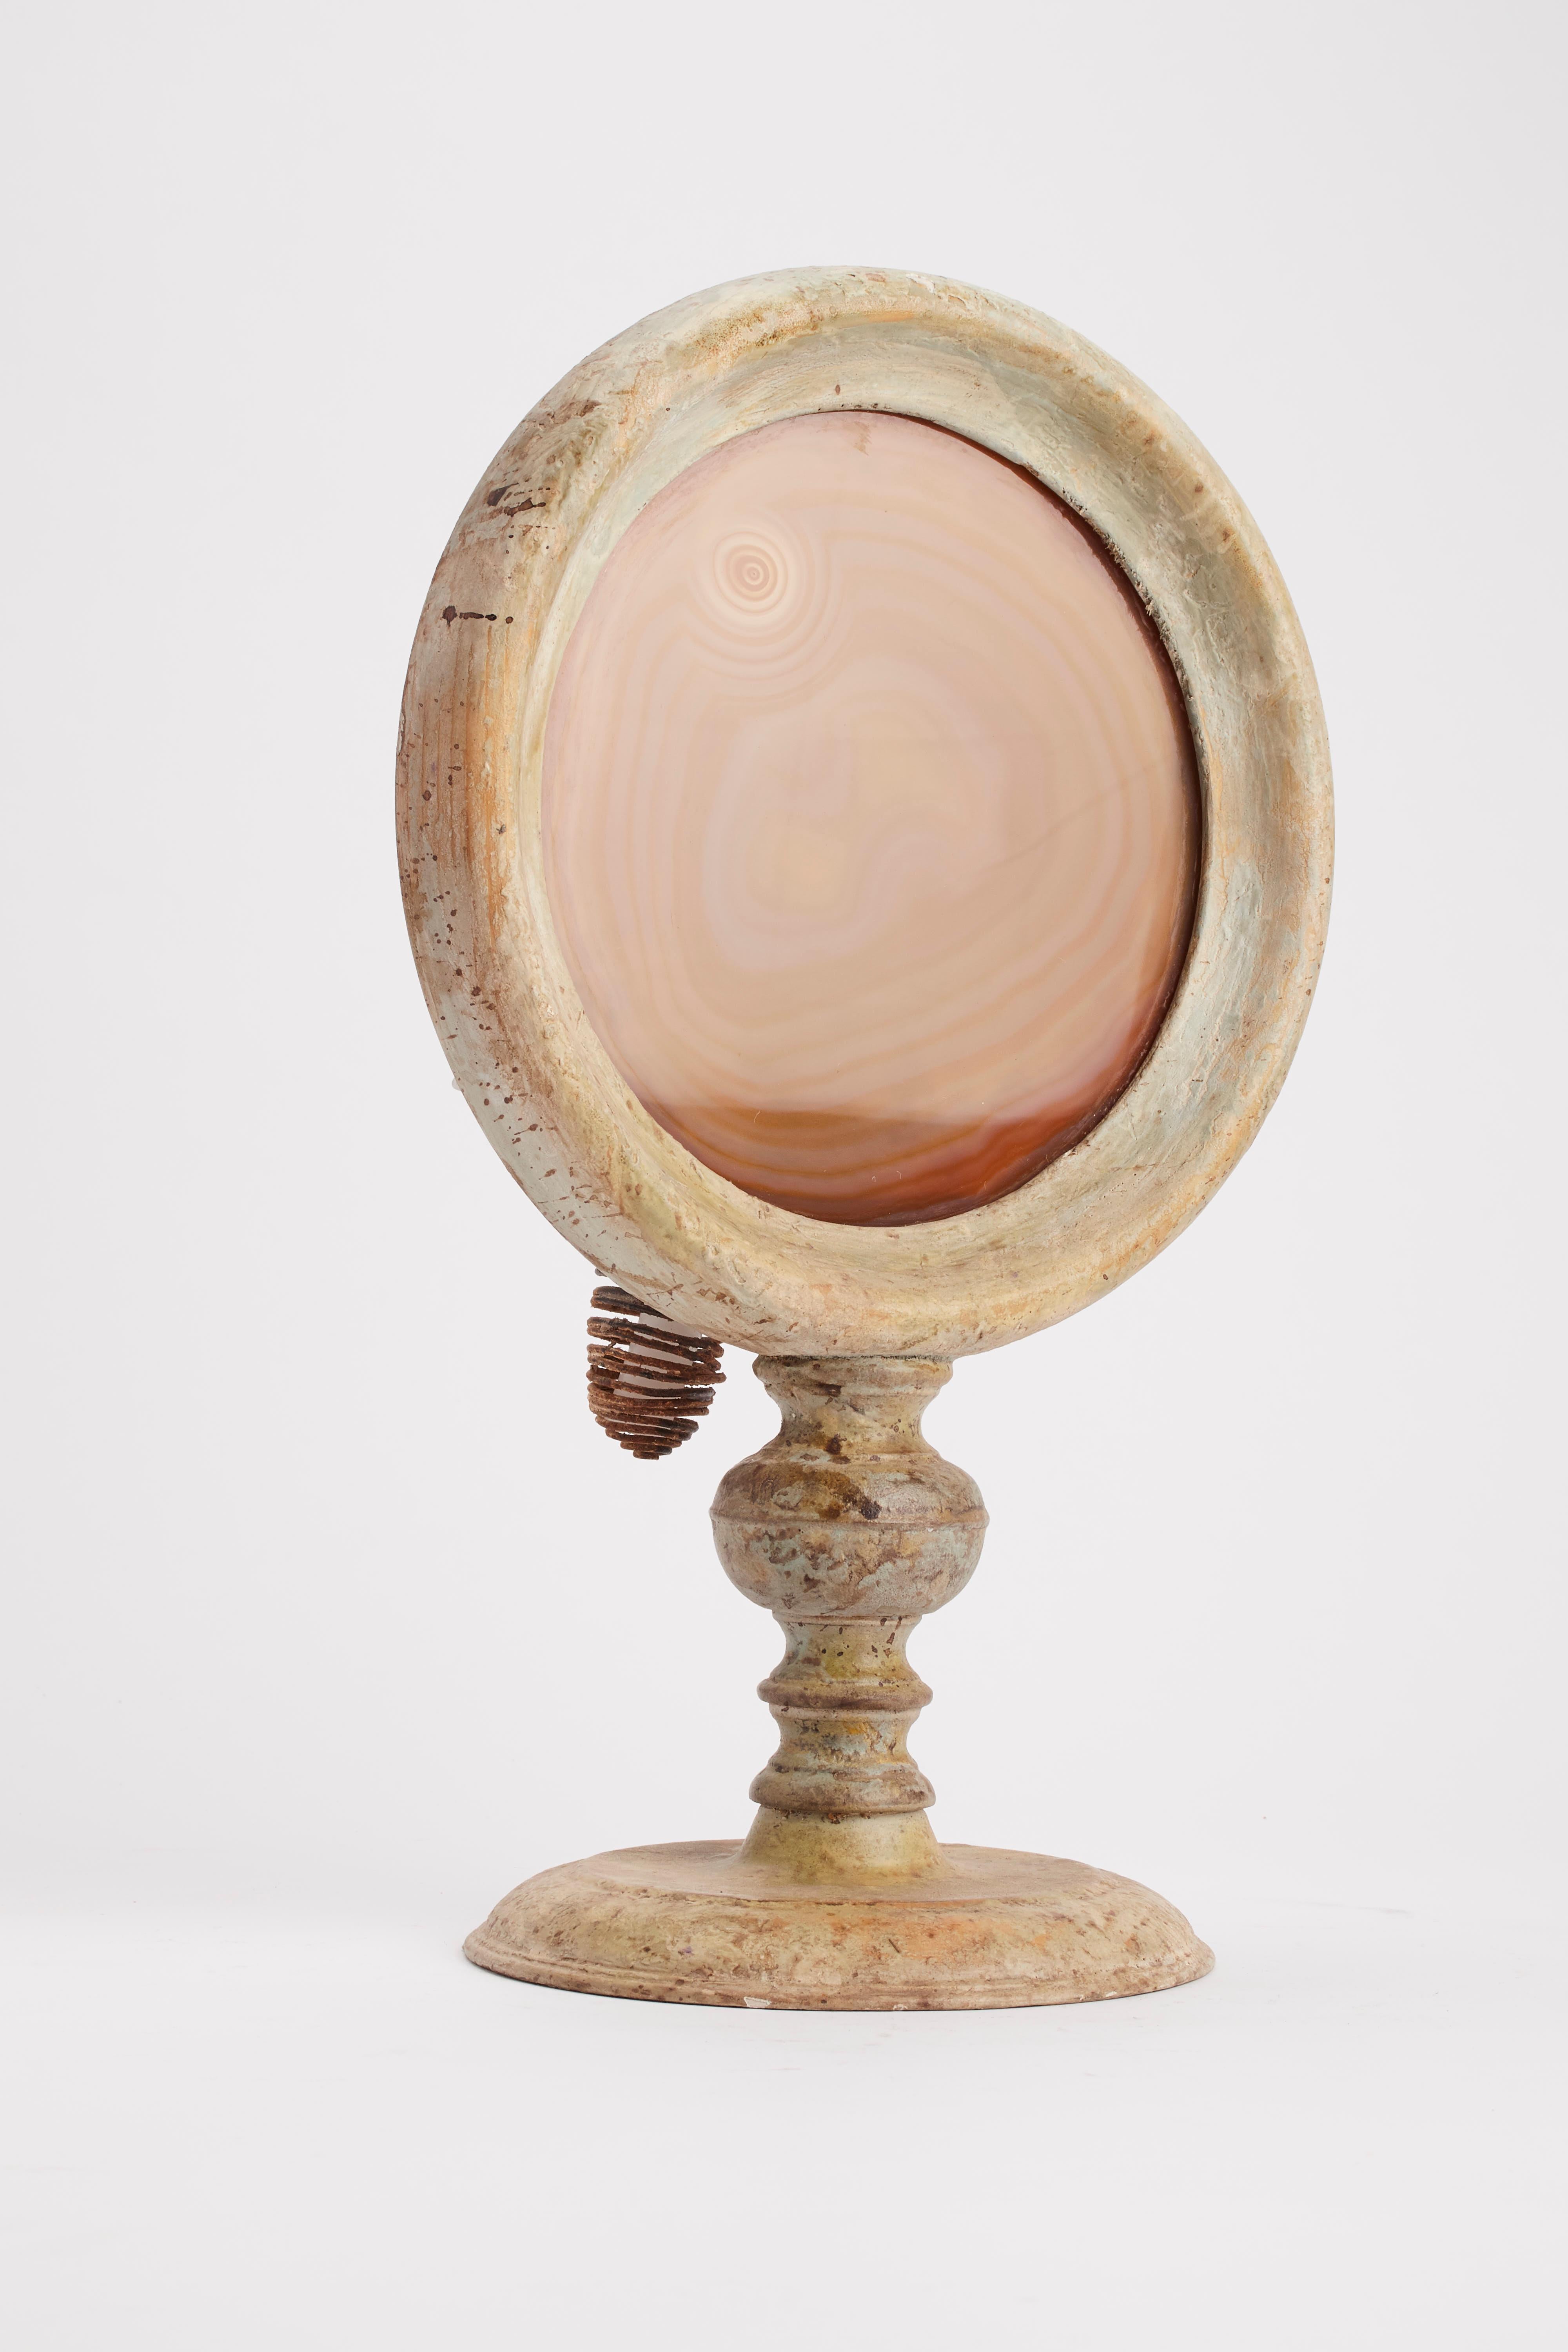 A Wunderkammer naturalia round shape agate specimen with light gray wooden frame, mounted over a light gray wooden base, with candle holder. Italy, 1880 ca.